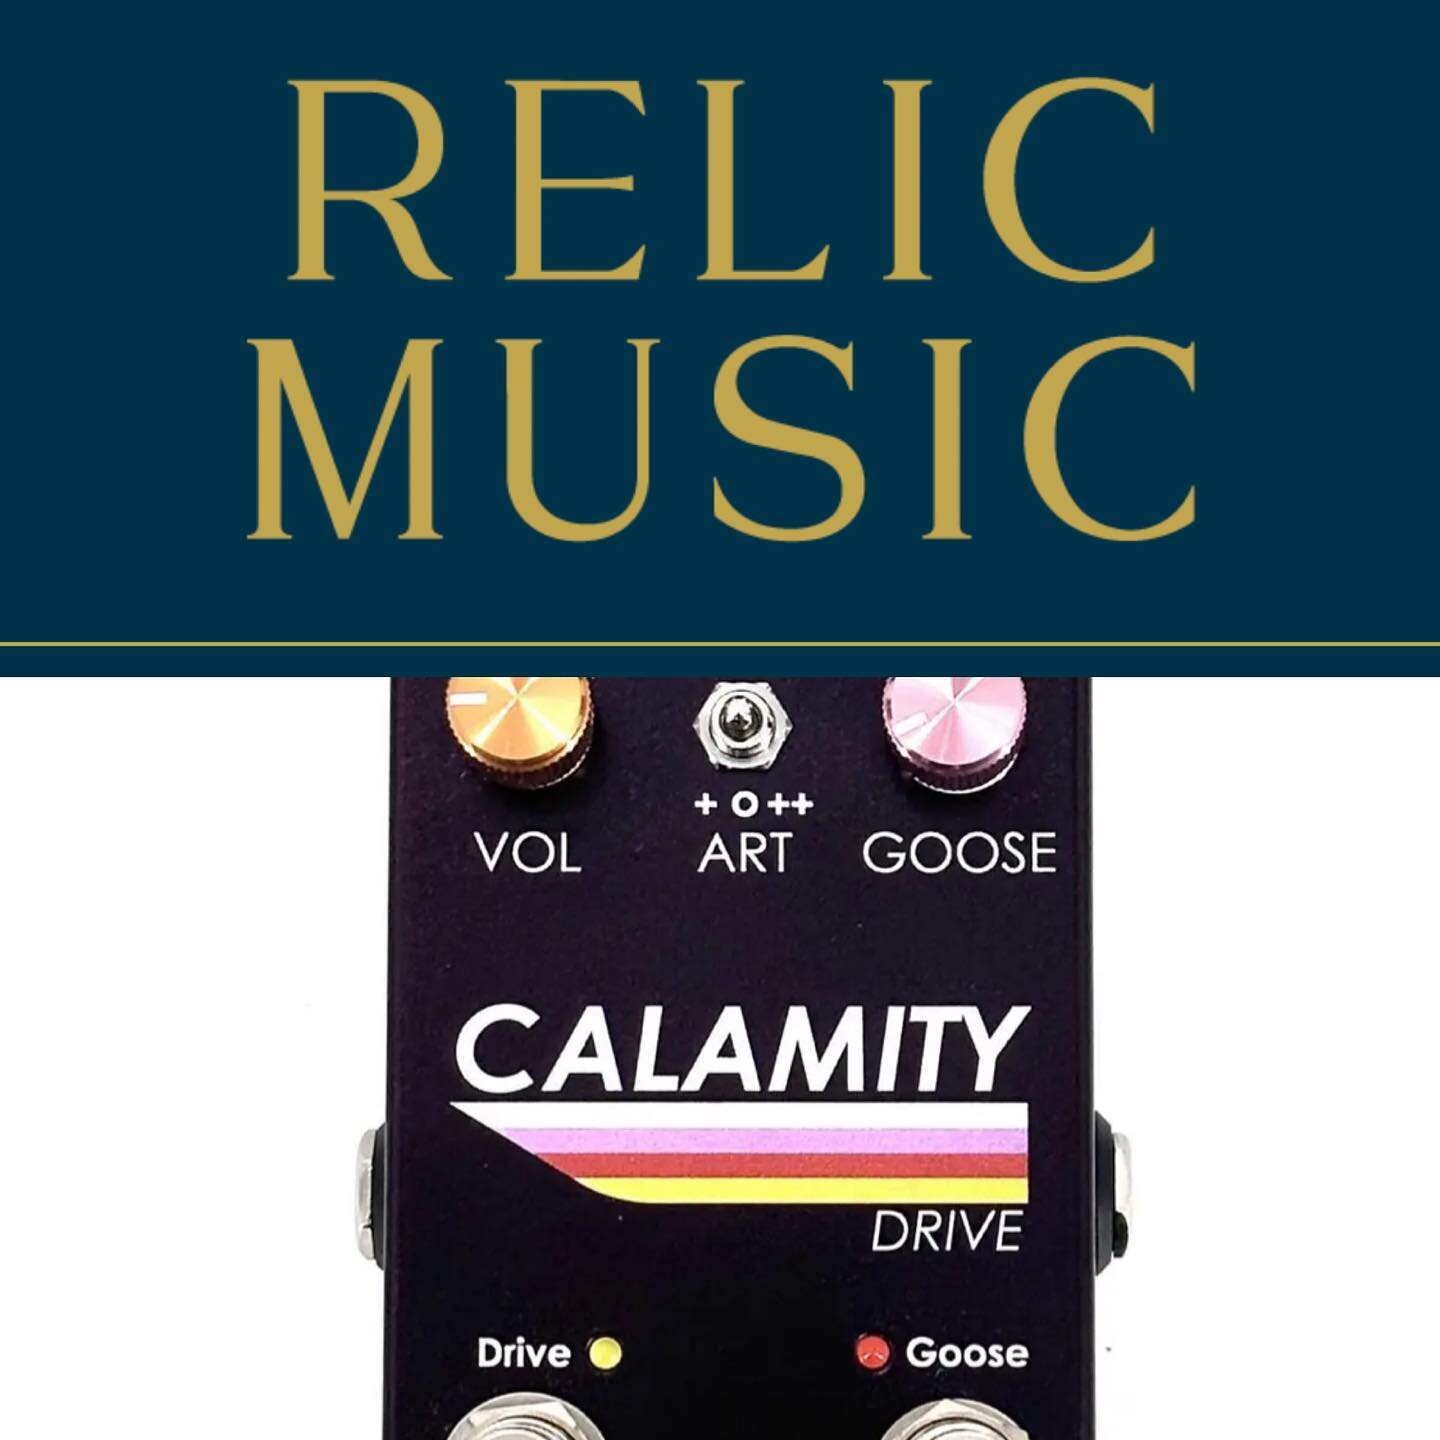 Calamity Drive officially has its first dealer, and we&rsquo;re so excited for it to be such a special shop.
@relicmusicshop have curated such a special space and we&rsquo;re proud that they are the first store to offer Calamity Drive.